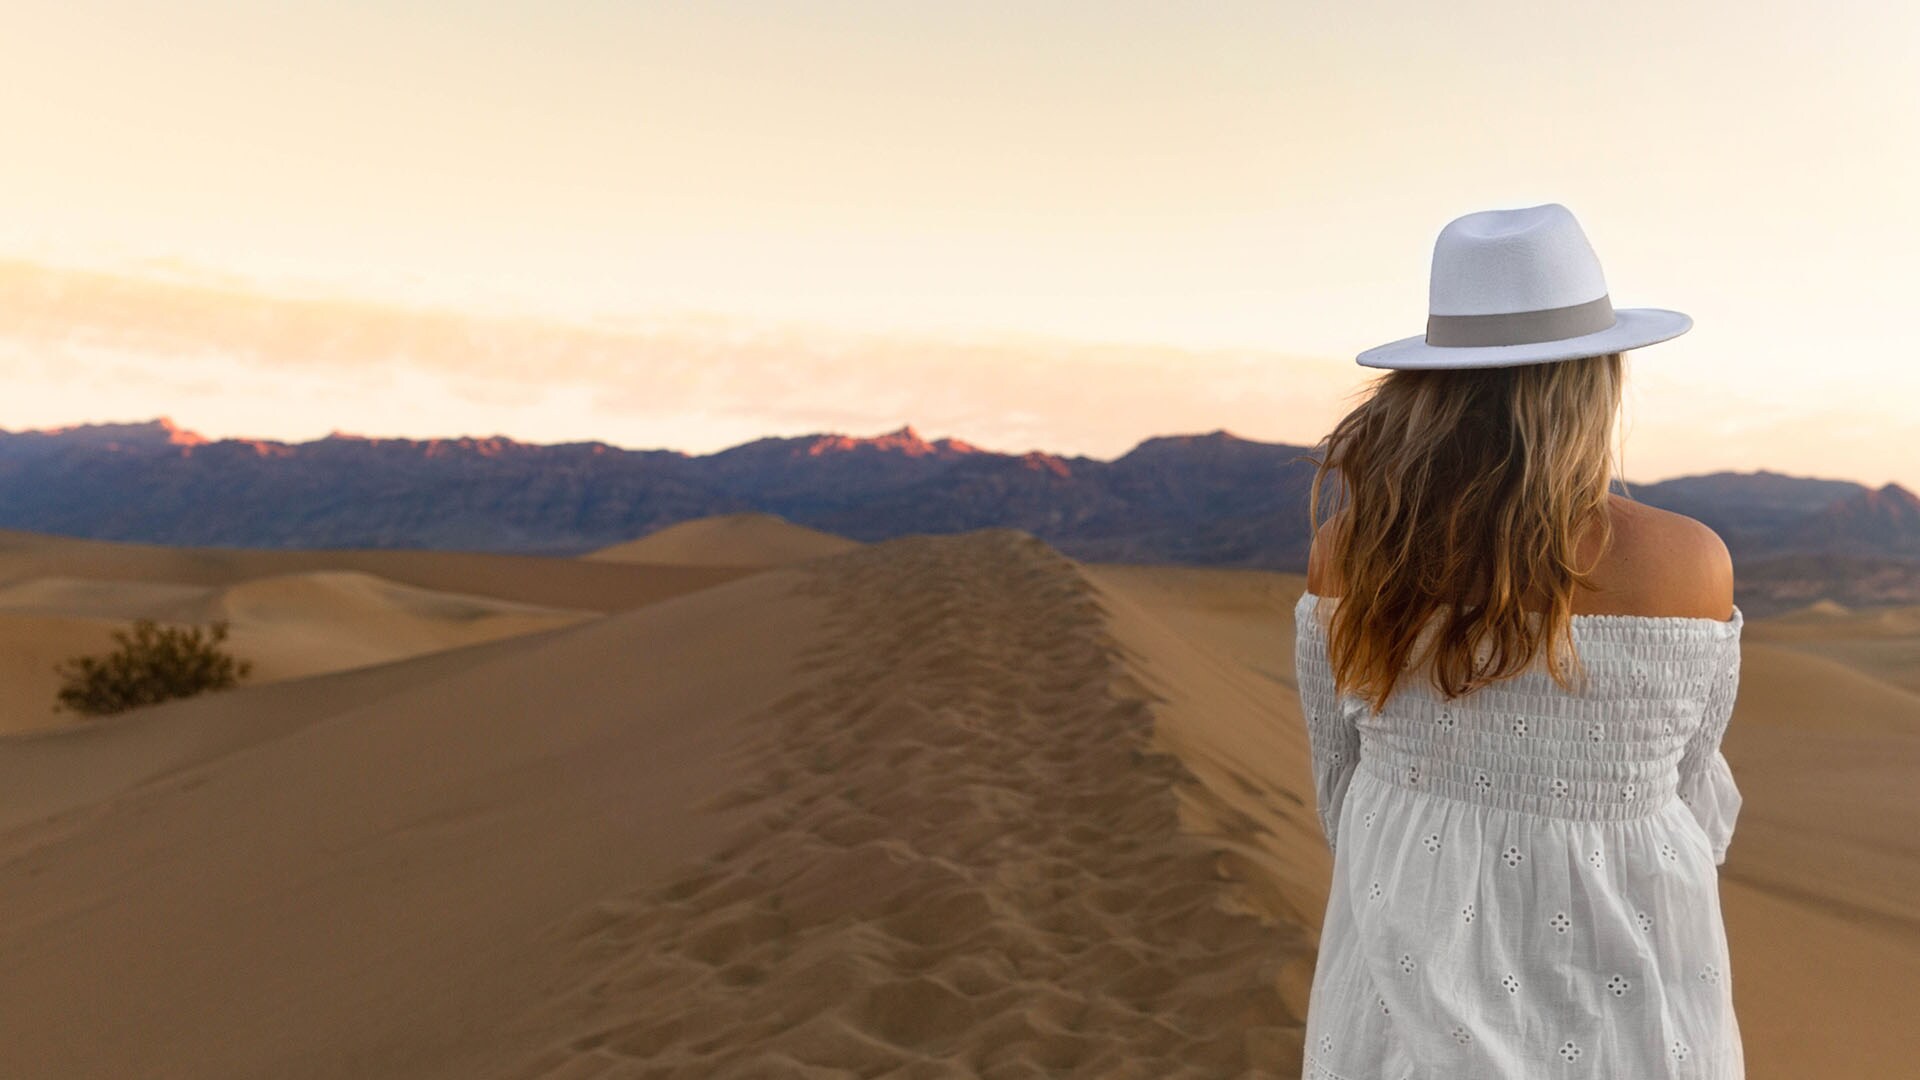 The author watches the sun rise at Mesquite Flat Sand Dunes in Death Valley National Park.